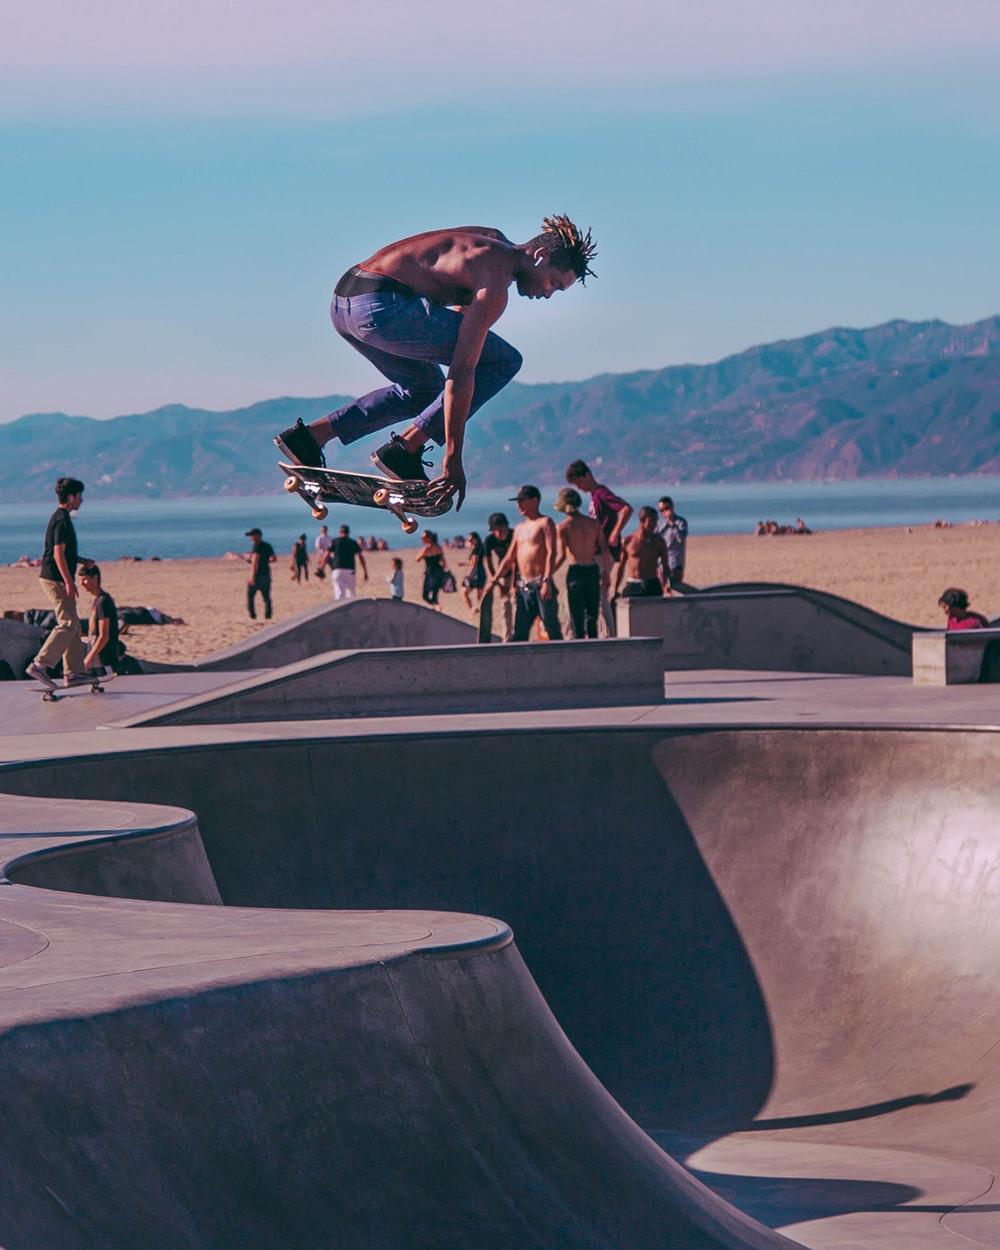 Skate Bowl Picture. Download Free Image